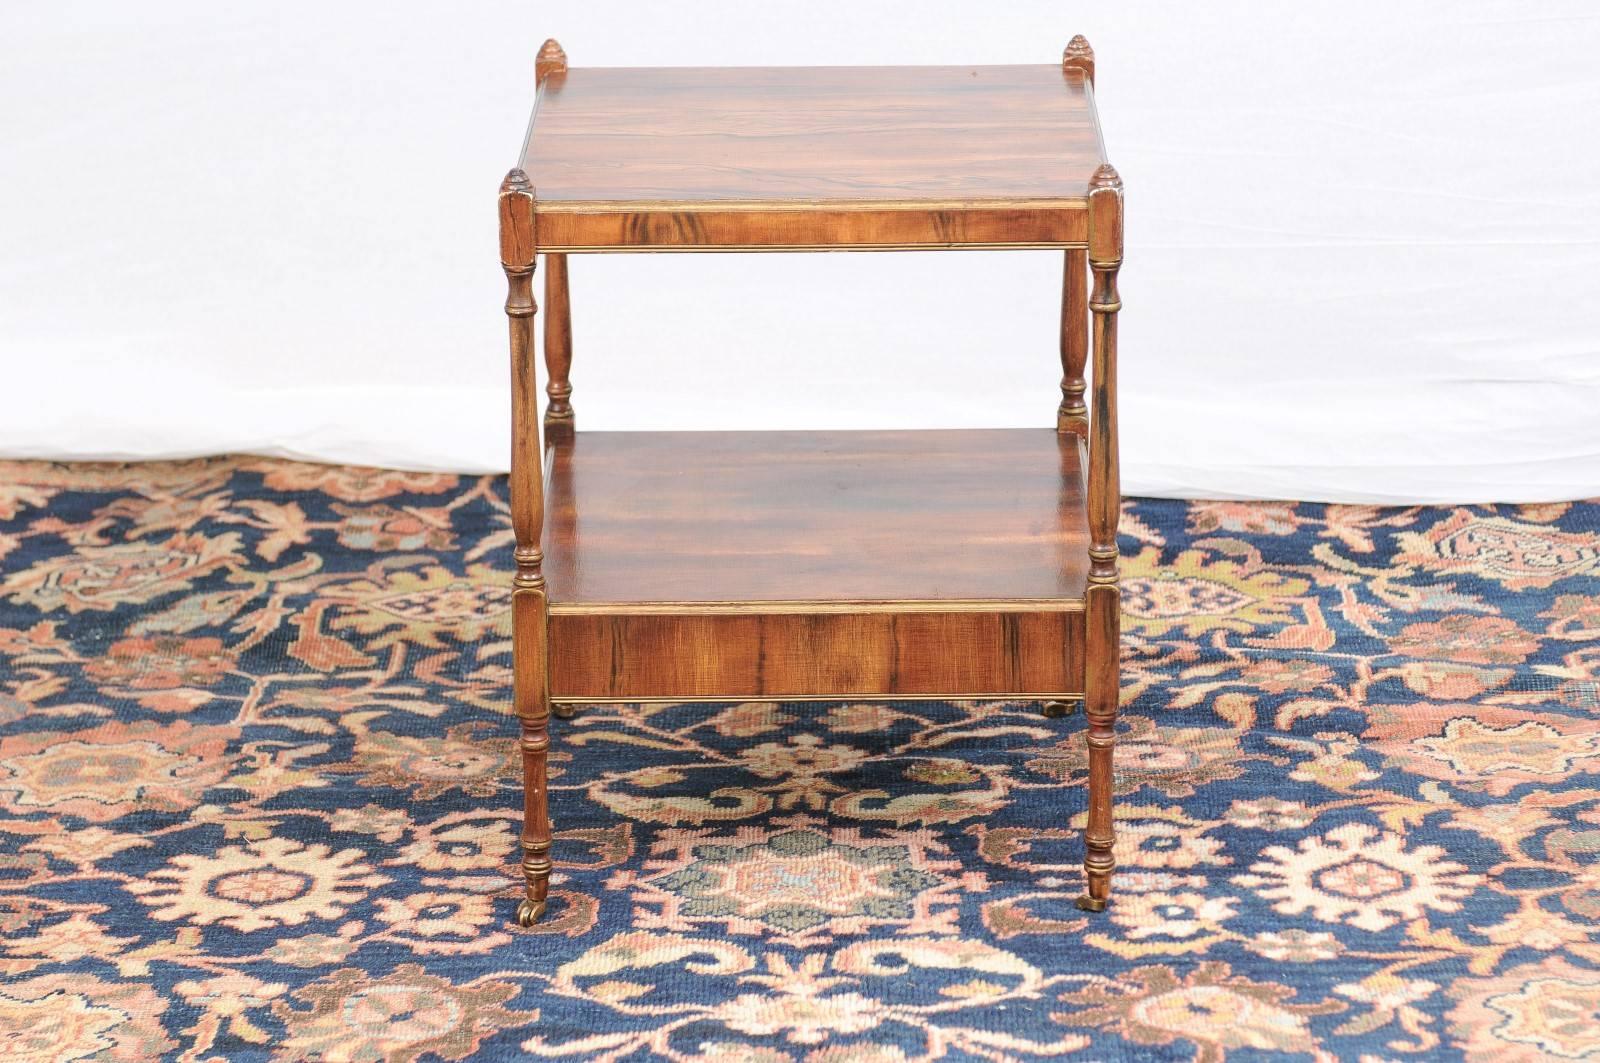 20th Century English Two-Tiered Side Table with Faux Bois Finish on Casters, circa 1920